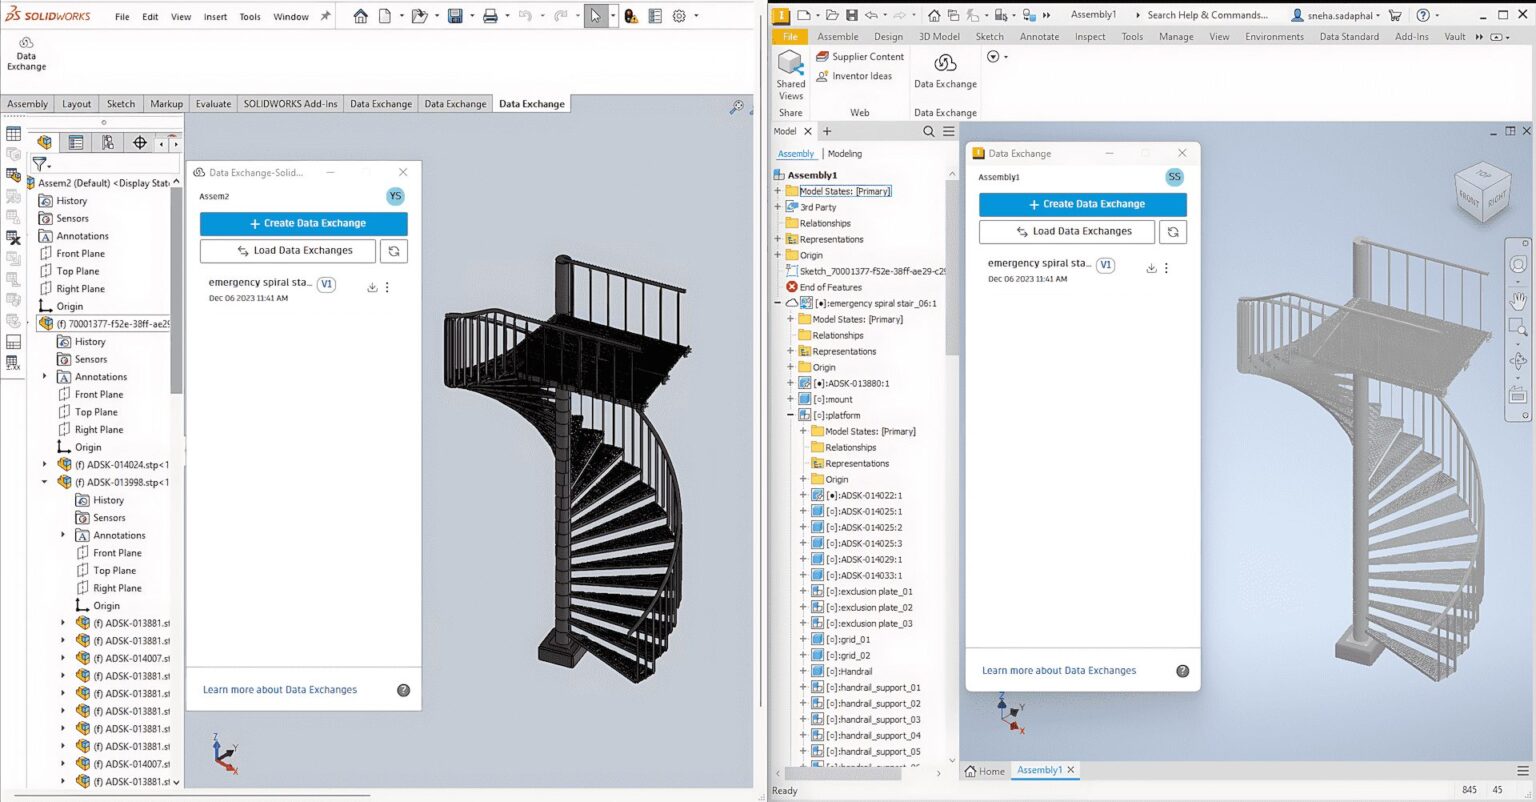 Explore the New Autodesk Data Exchange Connector for SolidWorks - Now in Public Beta